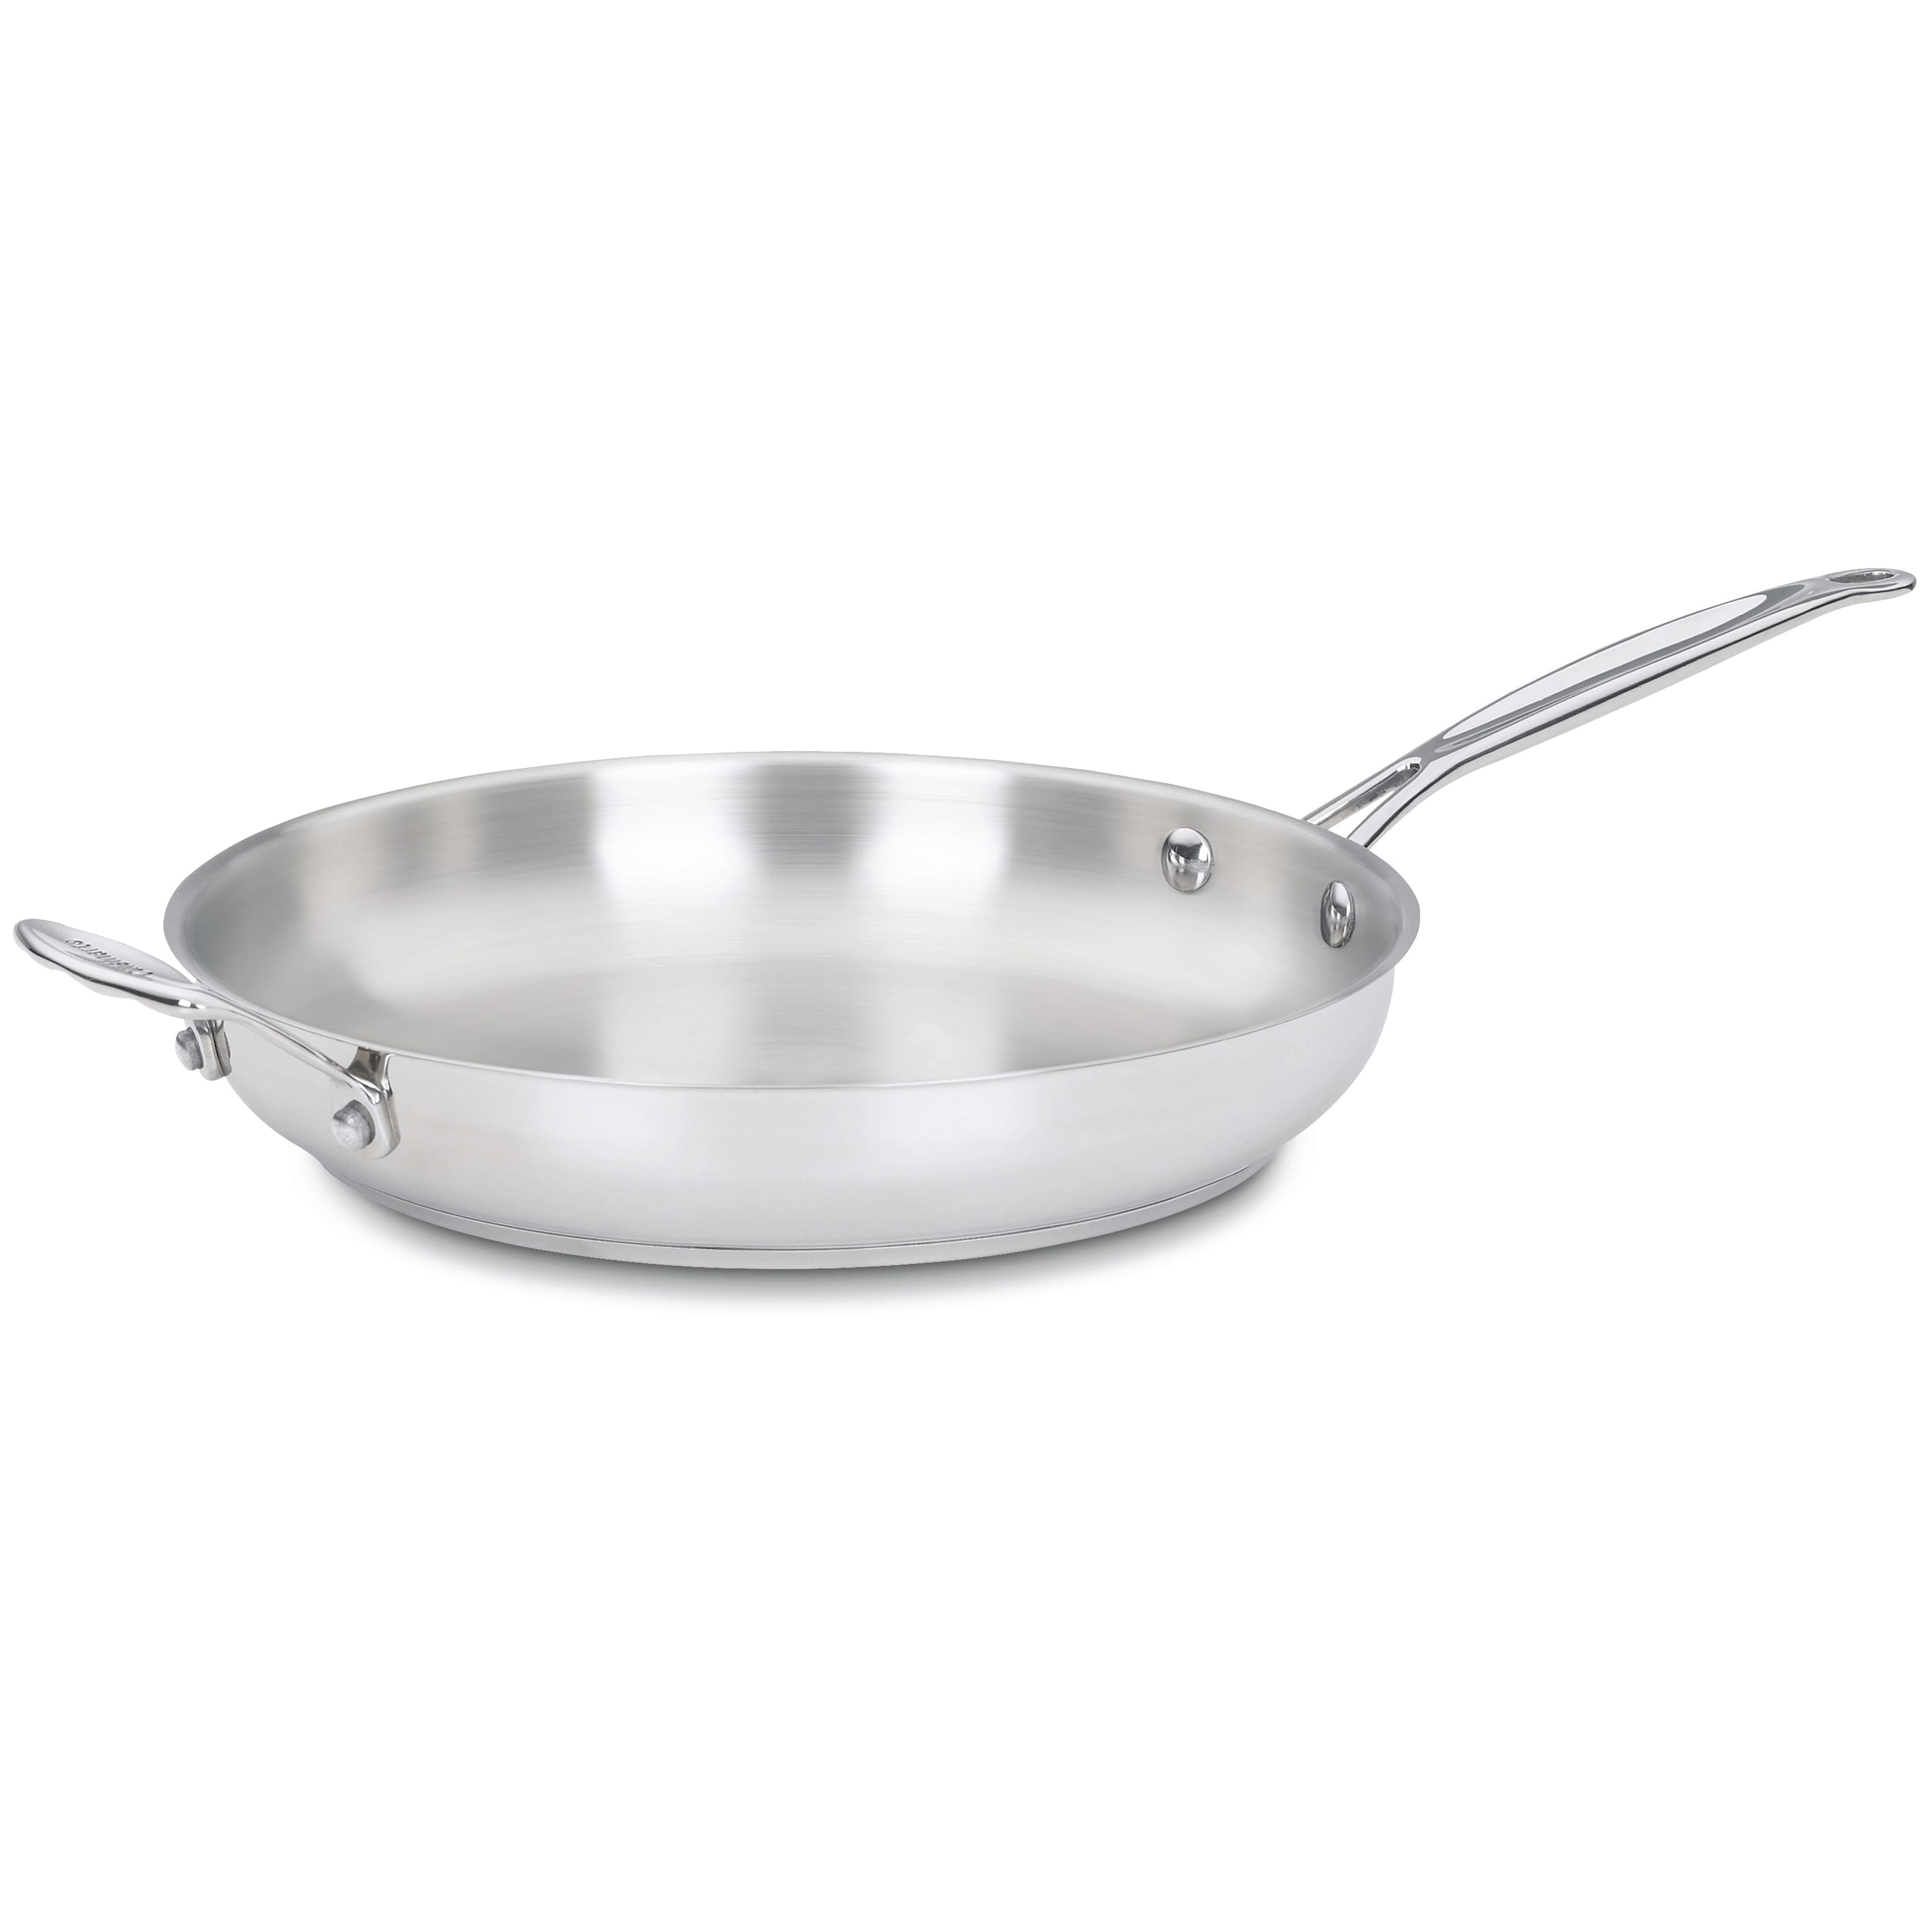  Cuisinart 12 Inch Skillet with Glass Cover, Chef's Classic  Collection, 722-30G: Home & Kitchen